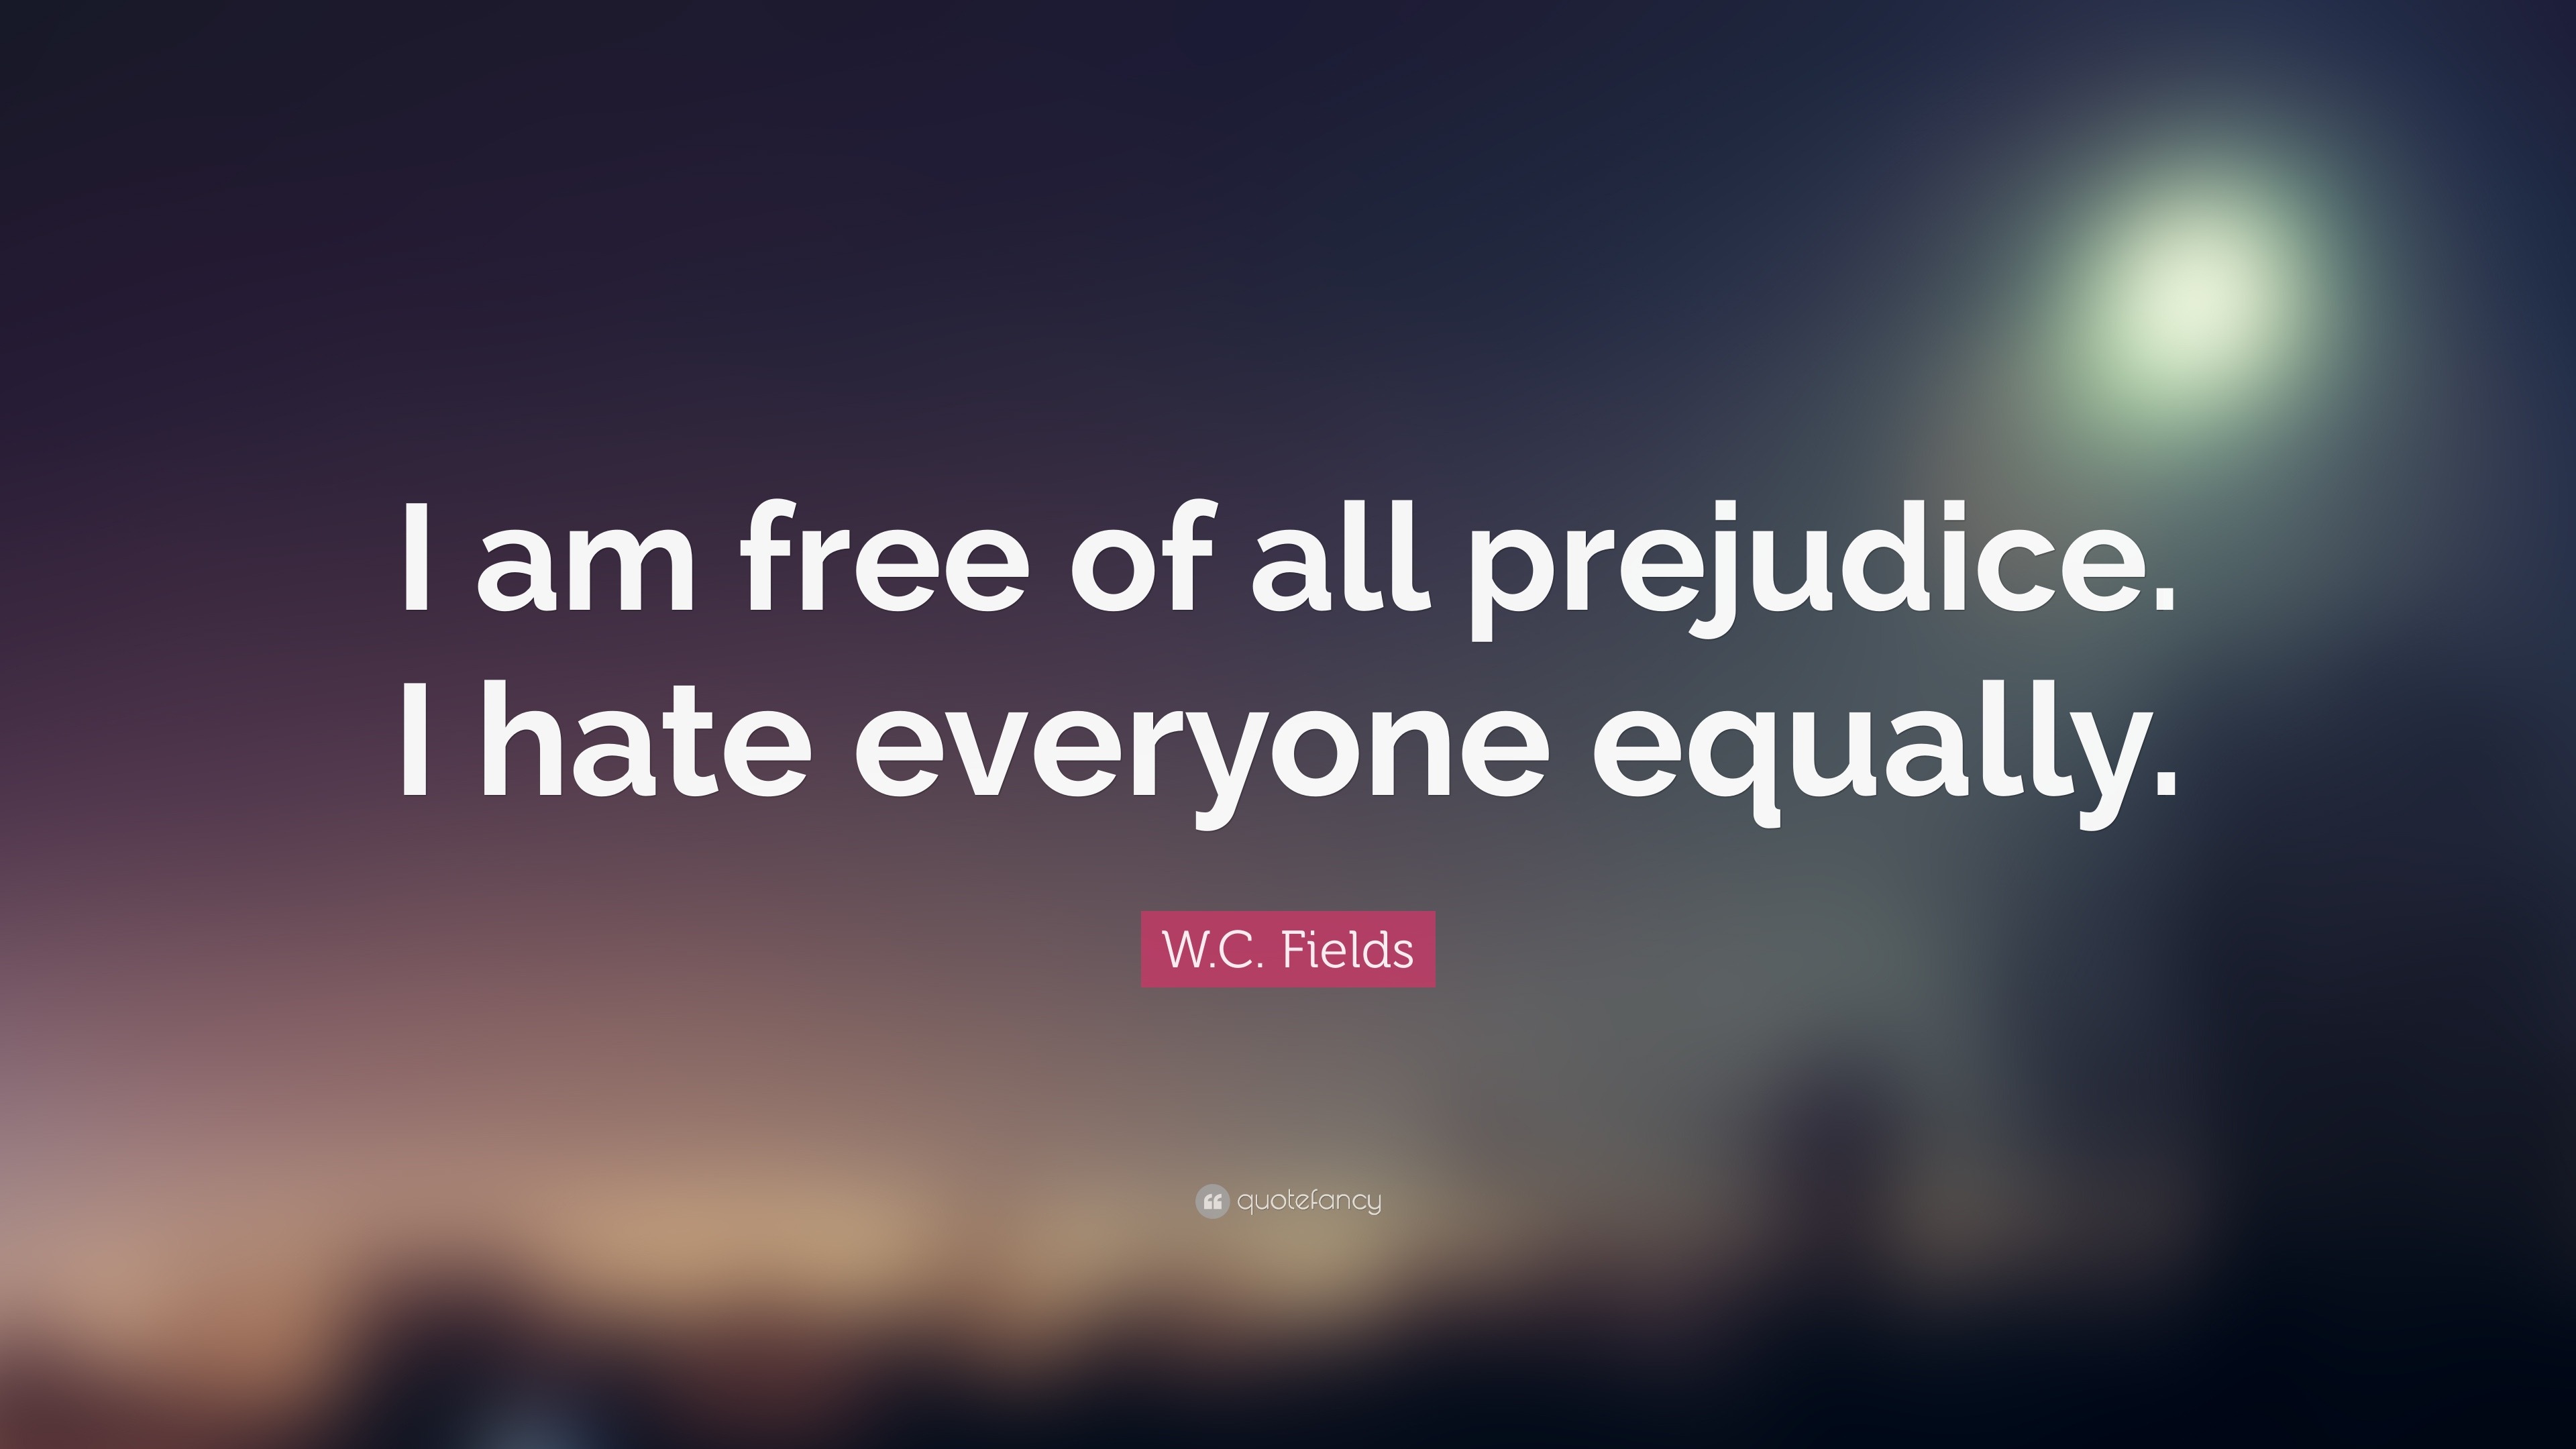 W C Fields Quote I am free of all prejudice I hate everyone equally 